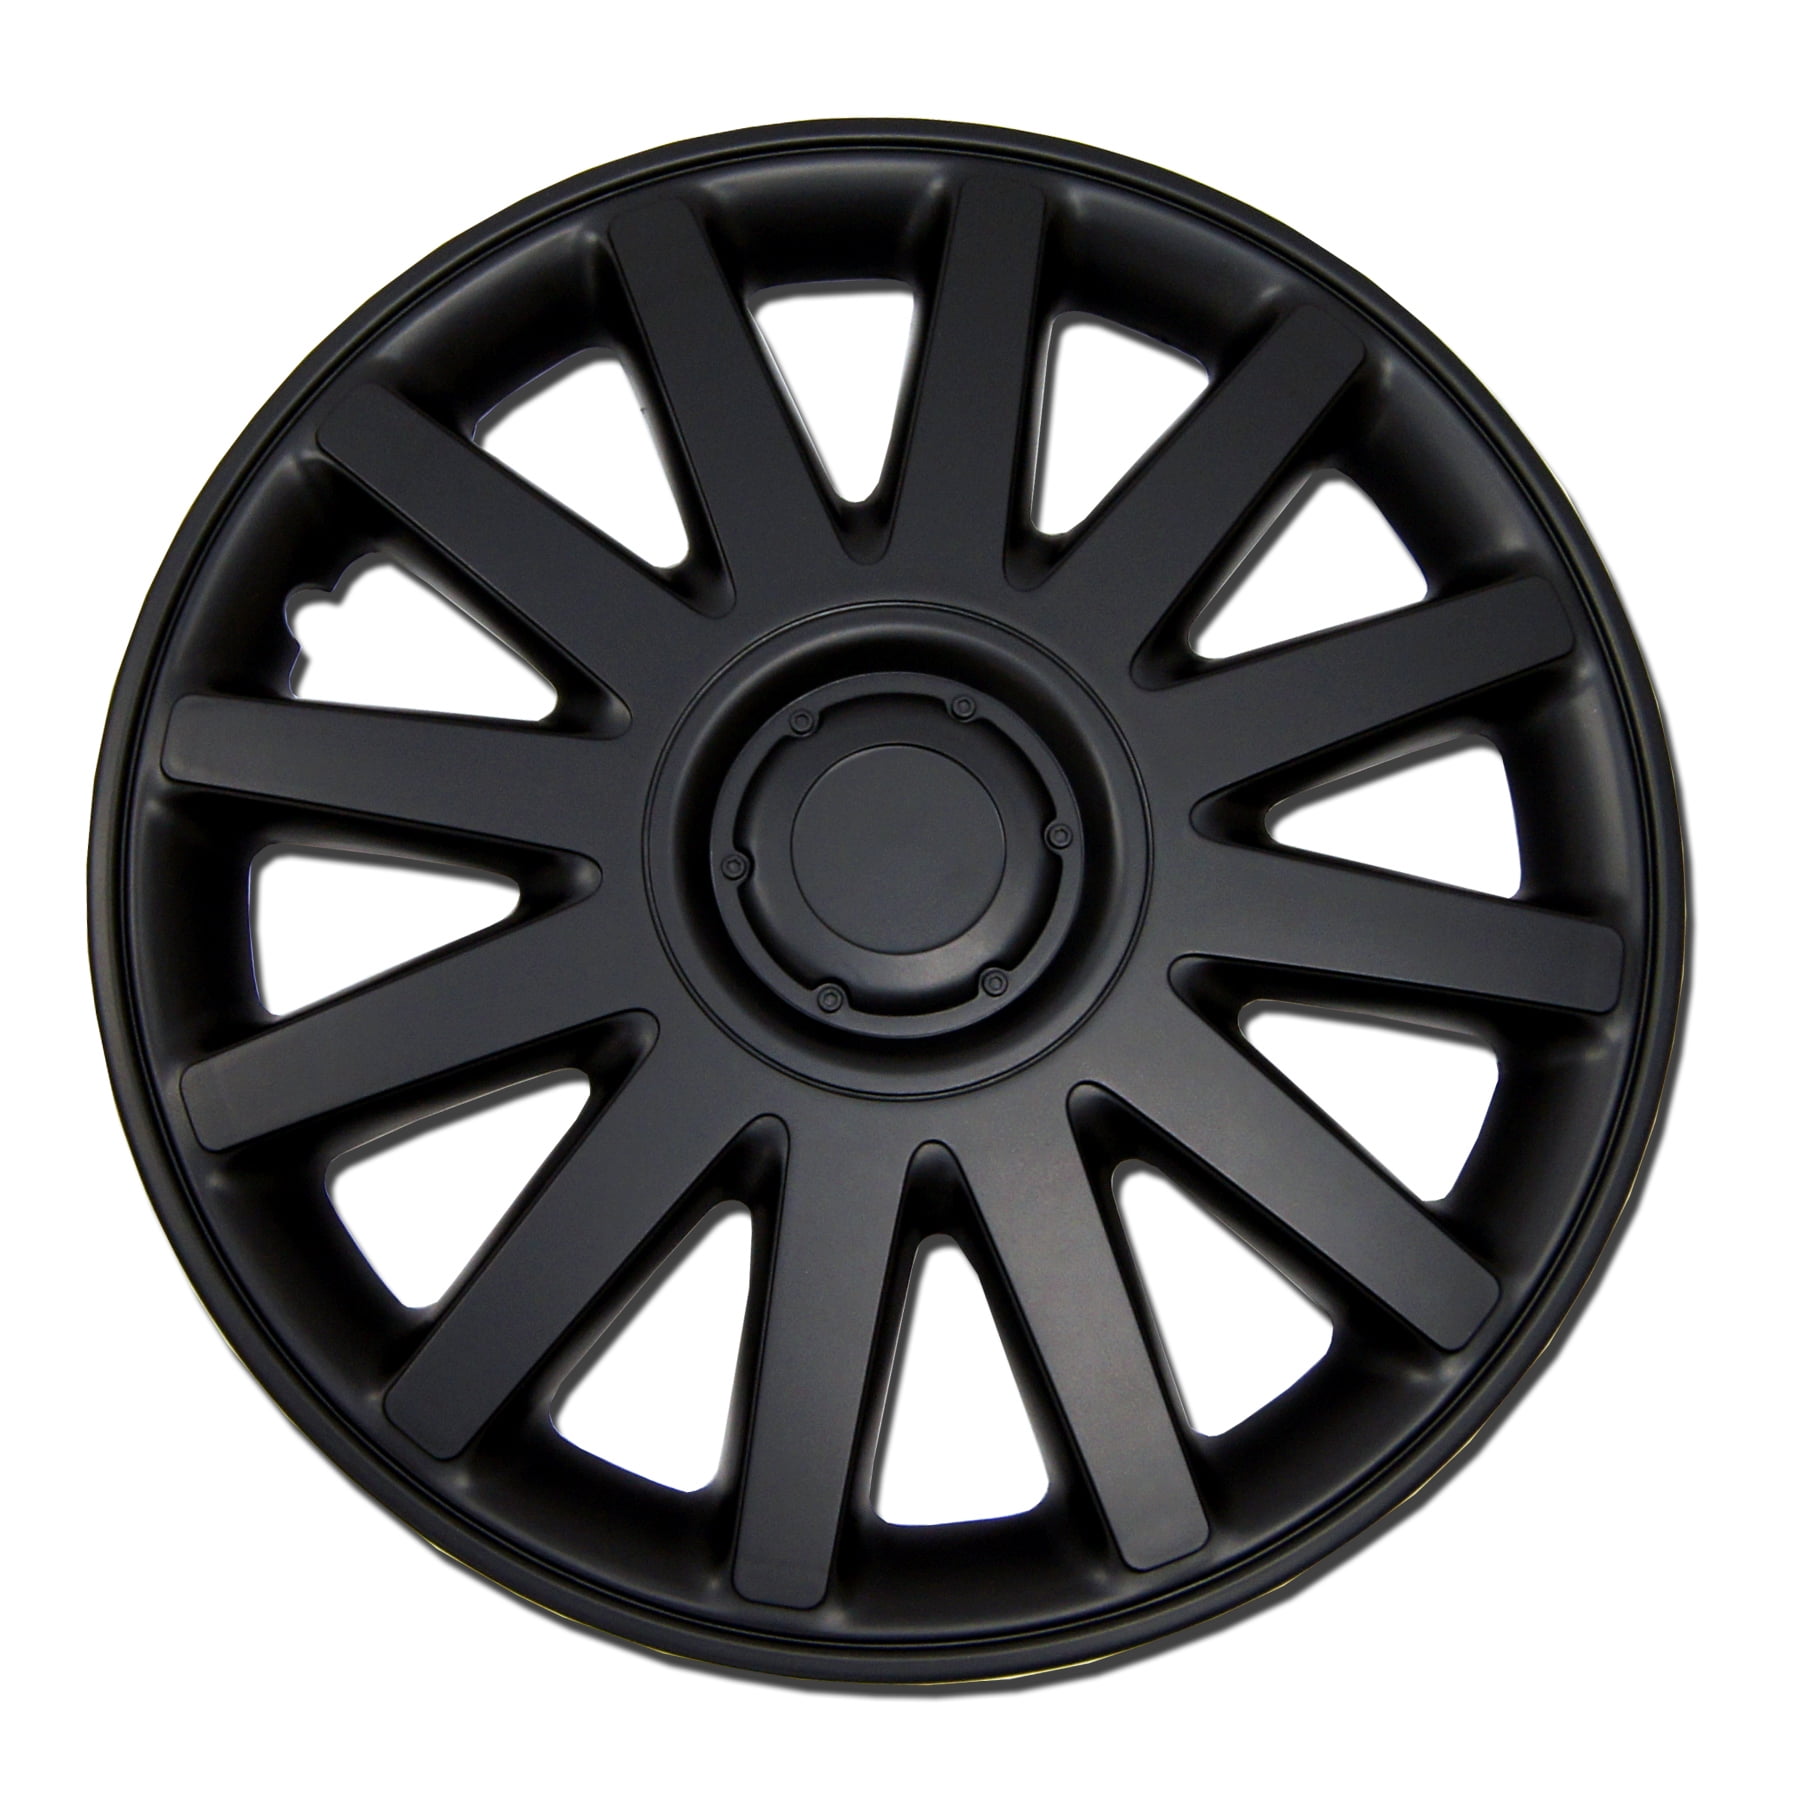 Tuningpros WC3-17-3533-B Type Matte Black Wheel Covers Hub-caps 17-Inches Style Snap-On Pack of 4 Hubcaps Pop-On 